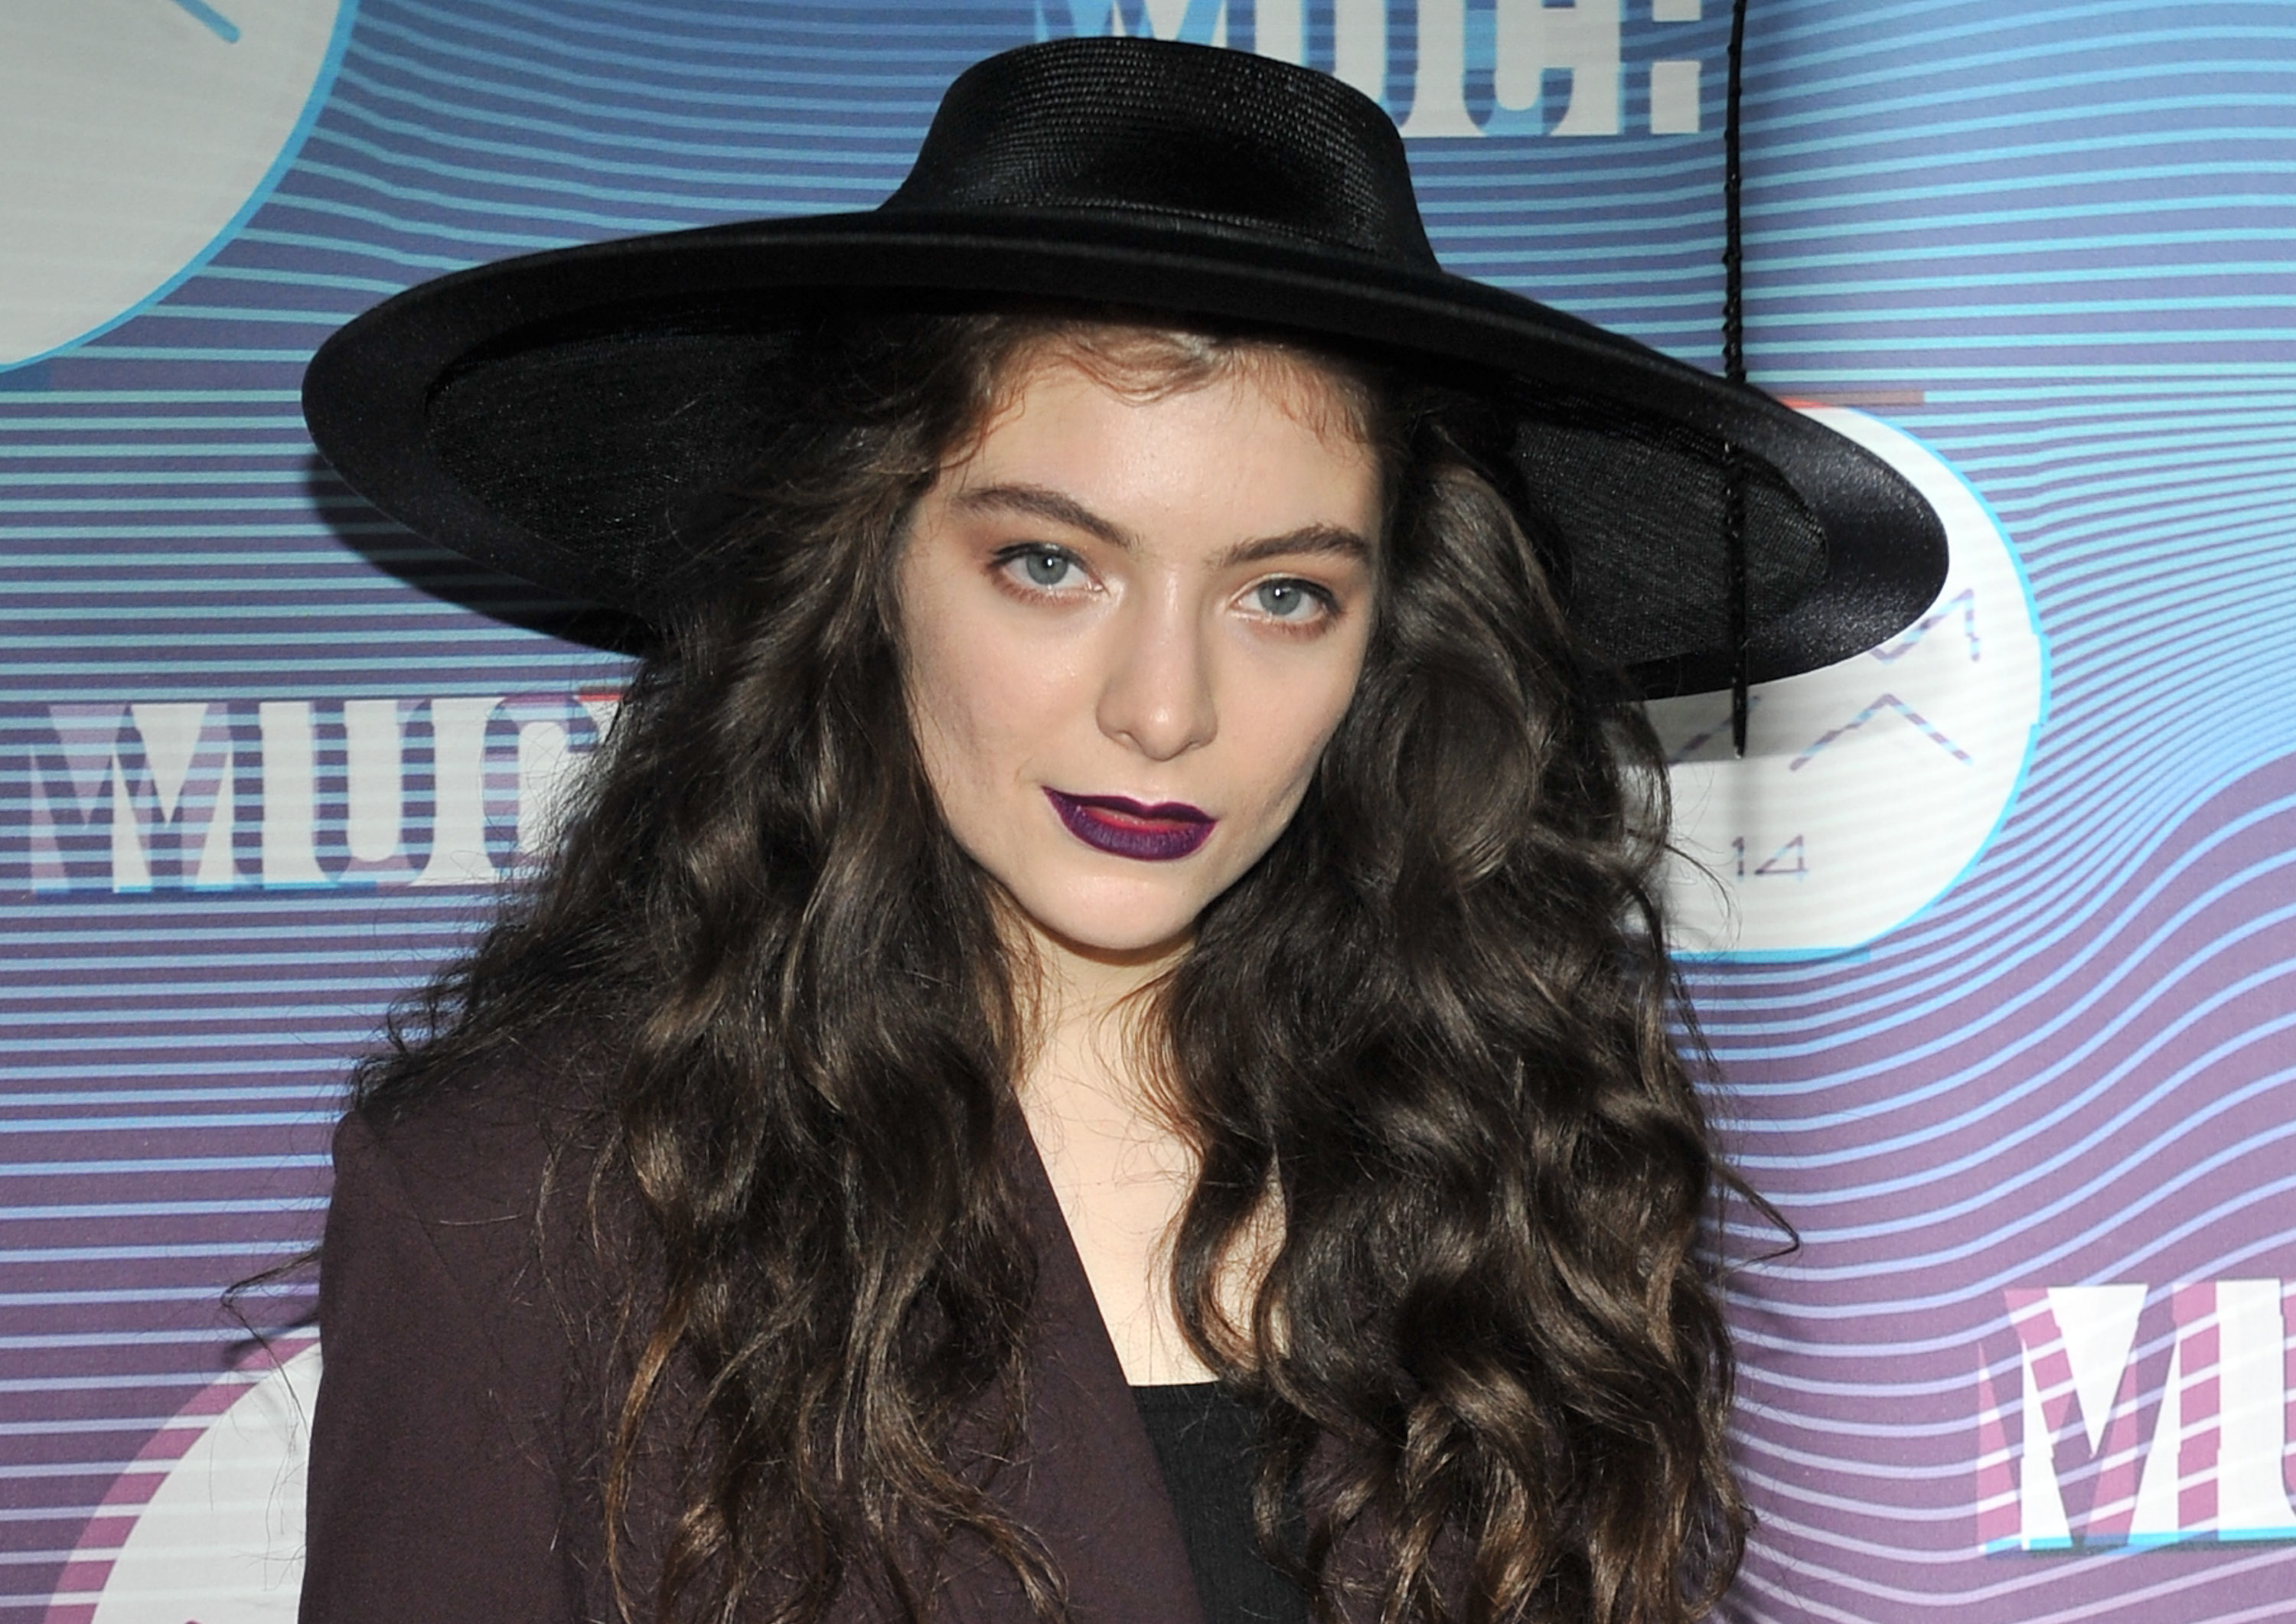 Lorde's 'Royals' song banned in San Francisco (for now)